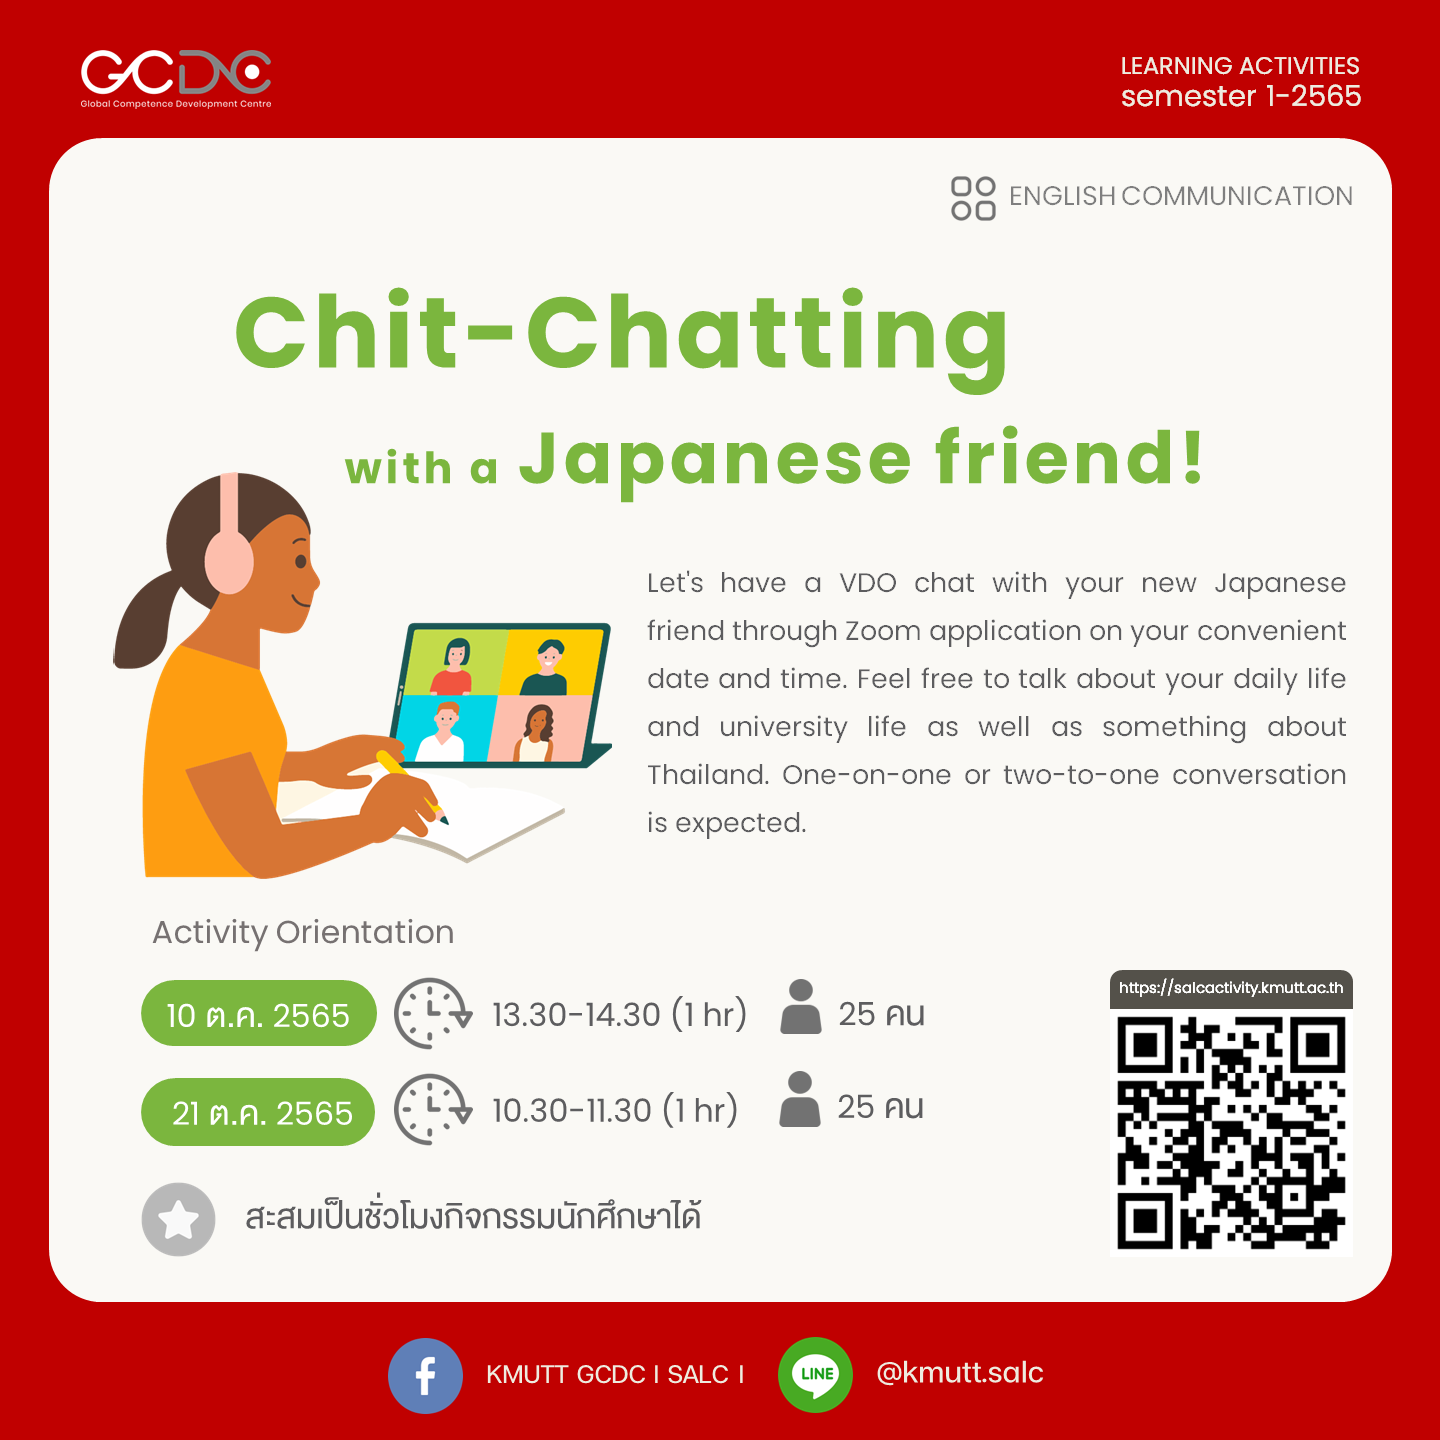 Chit-Chatting with a Japanese Friend!